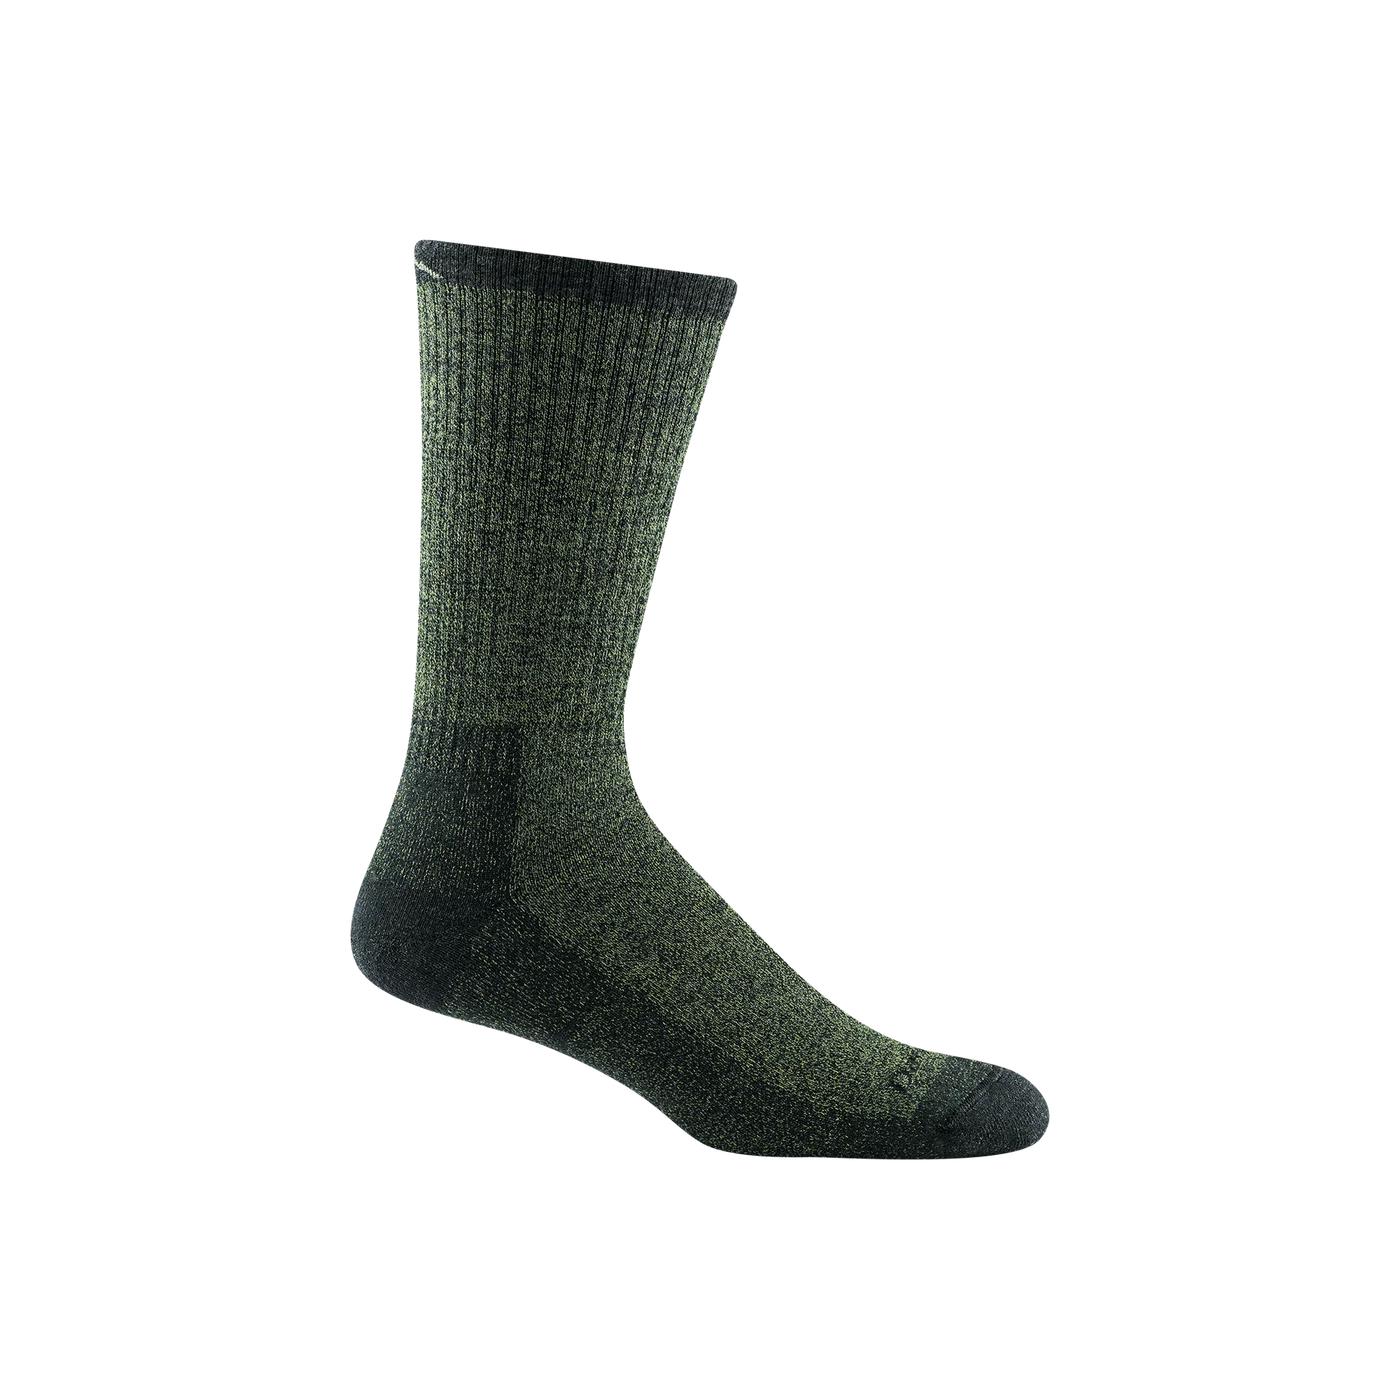 Darn Tough - Men's Nomad Boot Midweight Hiking Sock - Moss